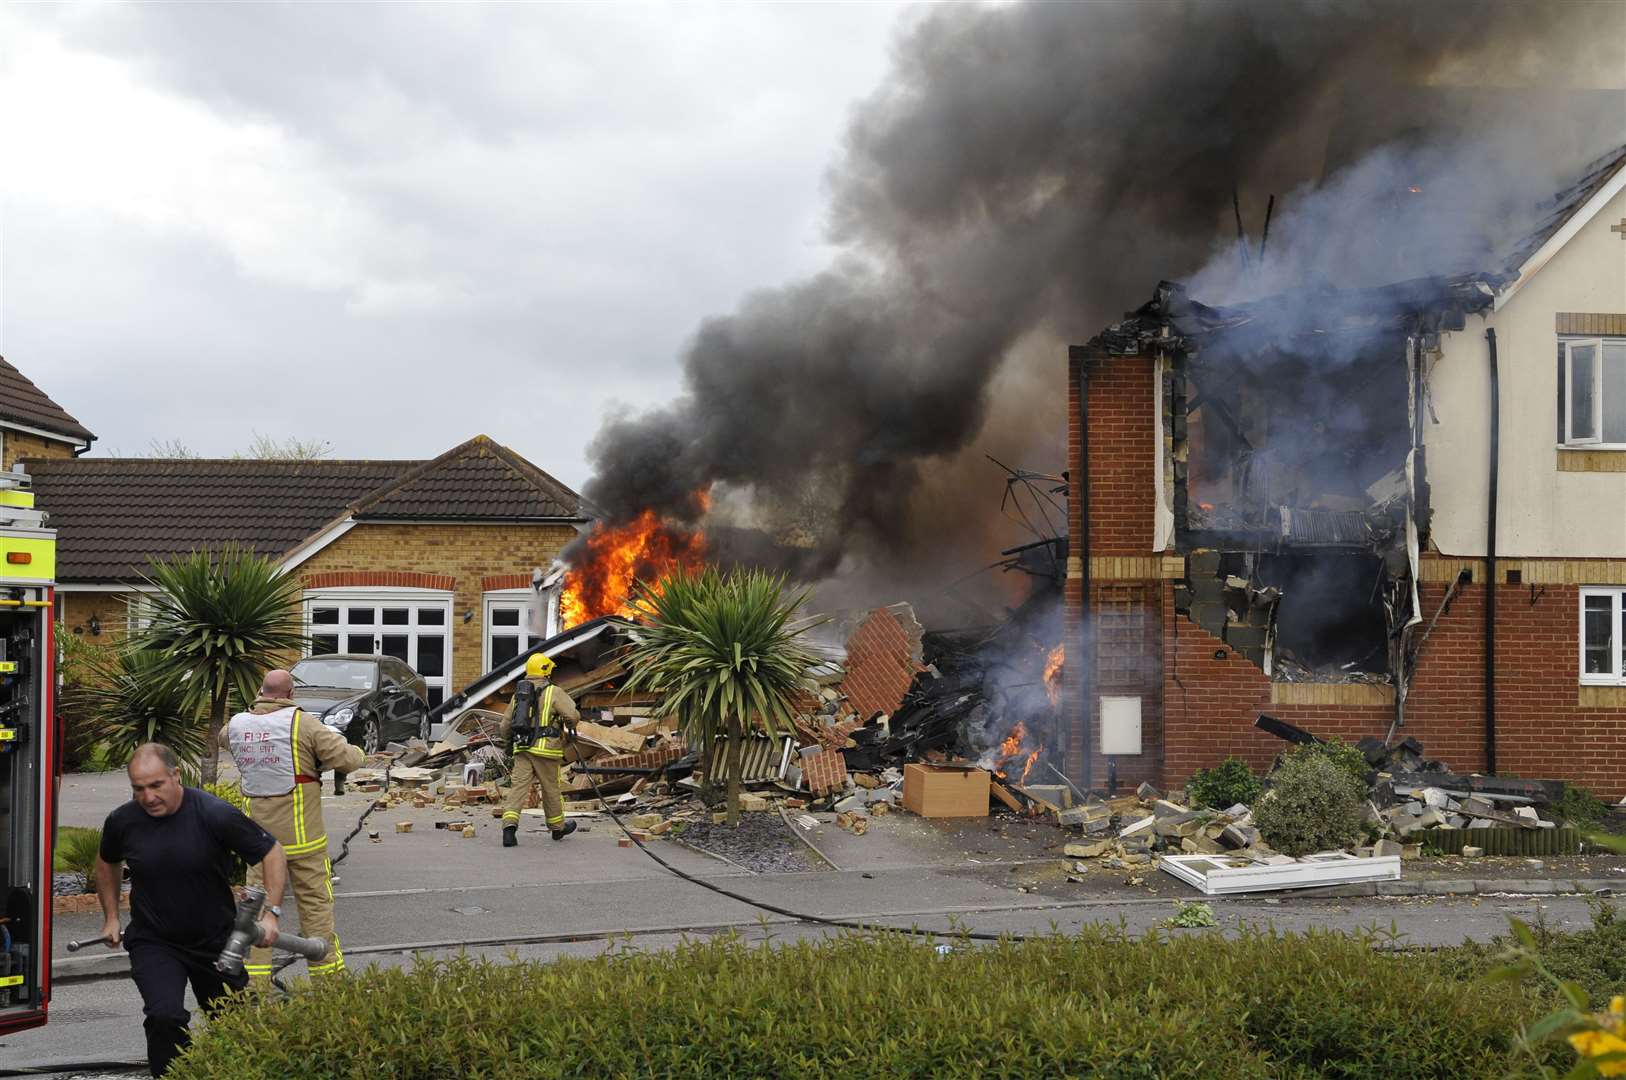 The large 2009 explosion was caused deliberately, resulting in a six year sentence being handed down in 2010. Picture: Andy Payton